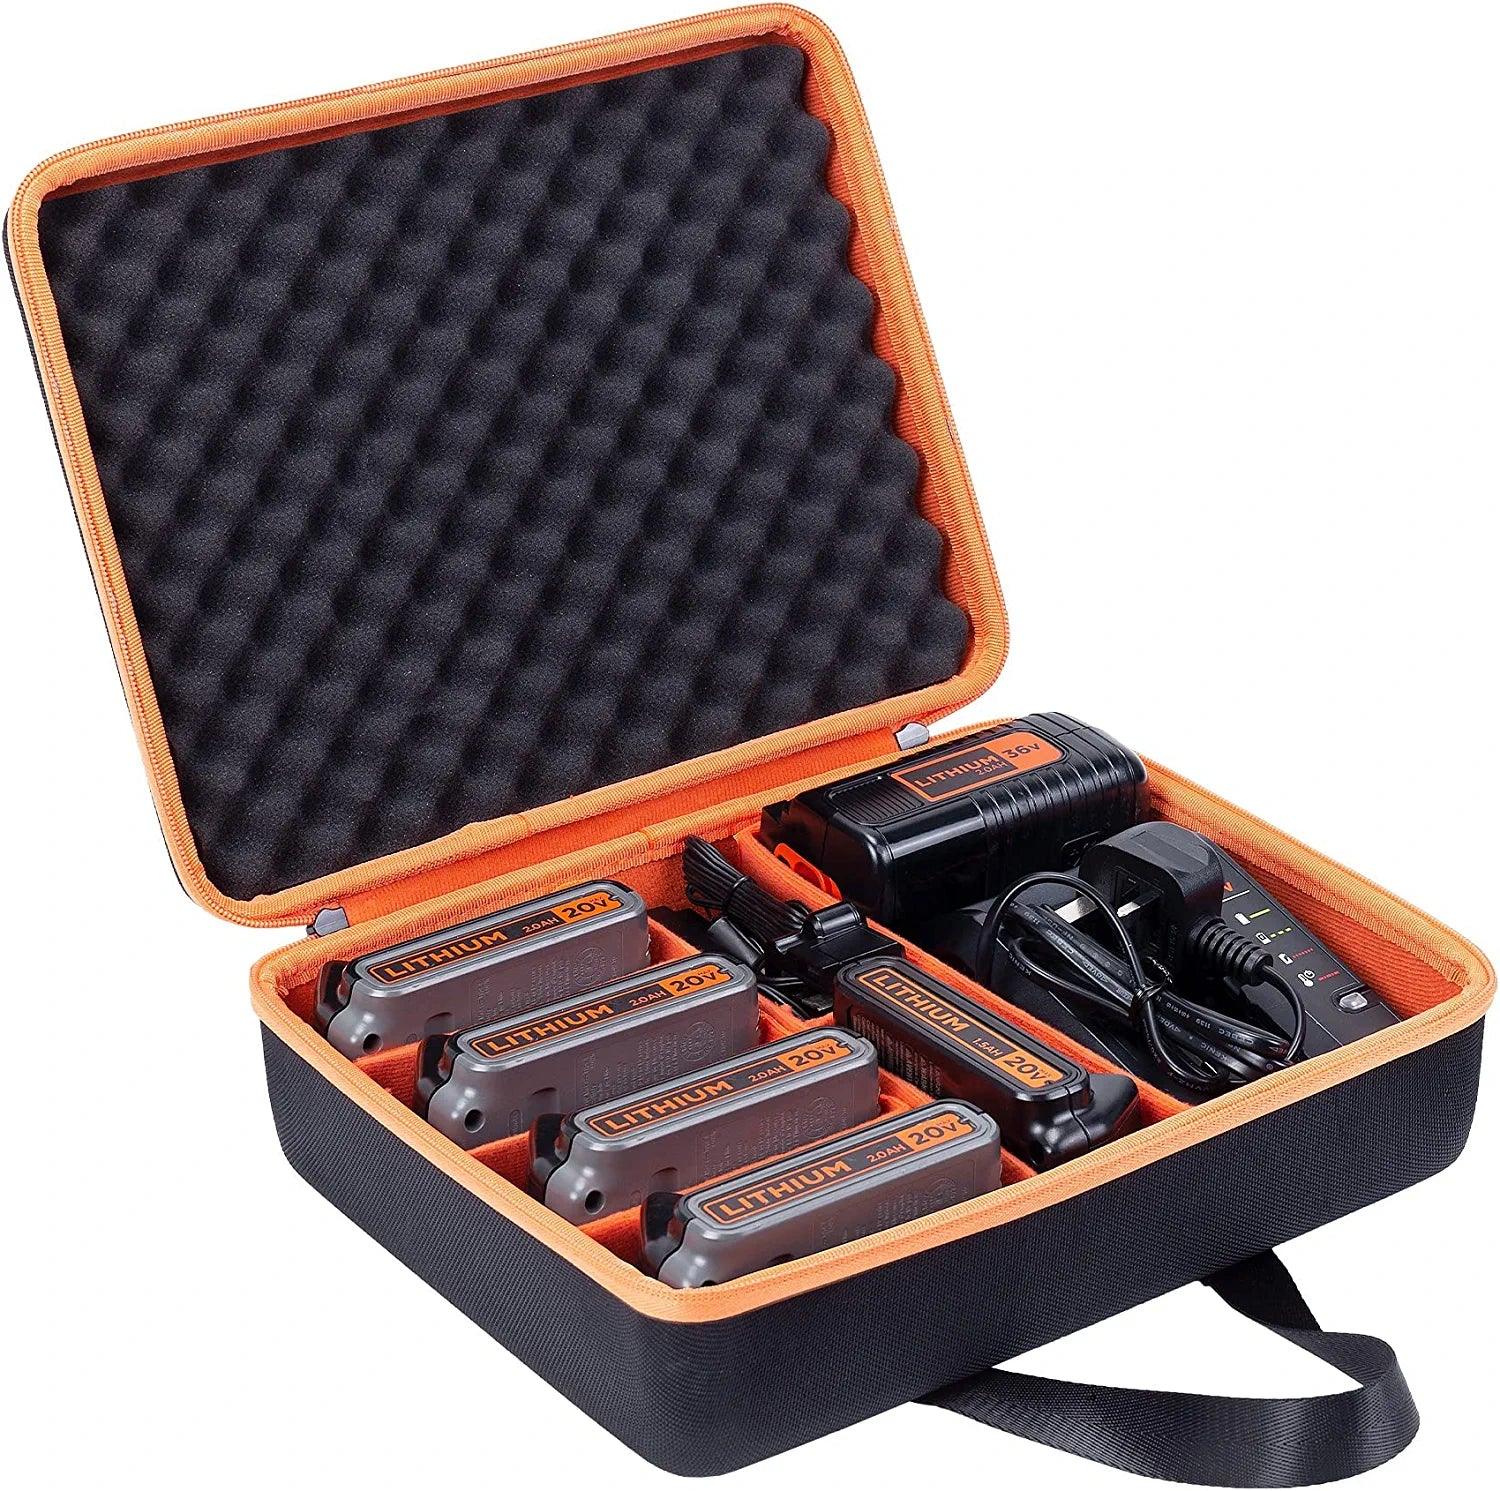 Carrying Case Replacement for Black+Decker 20V/40V Max XR Battery and Charger - Holds 20V 60V 1.3/1.5/2.0/2.5/3.0/4.0-Ah Battery, Charger